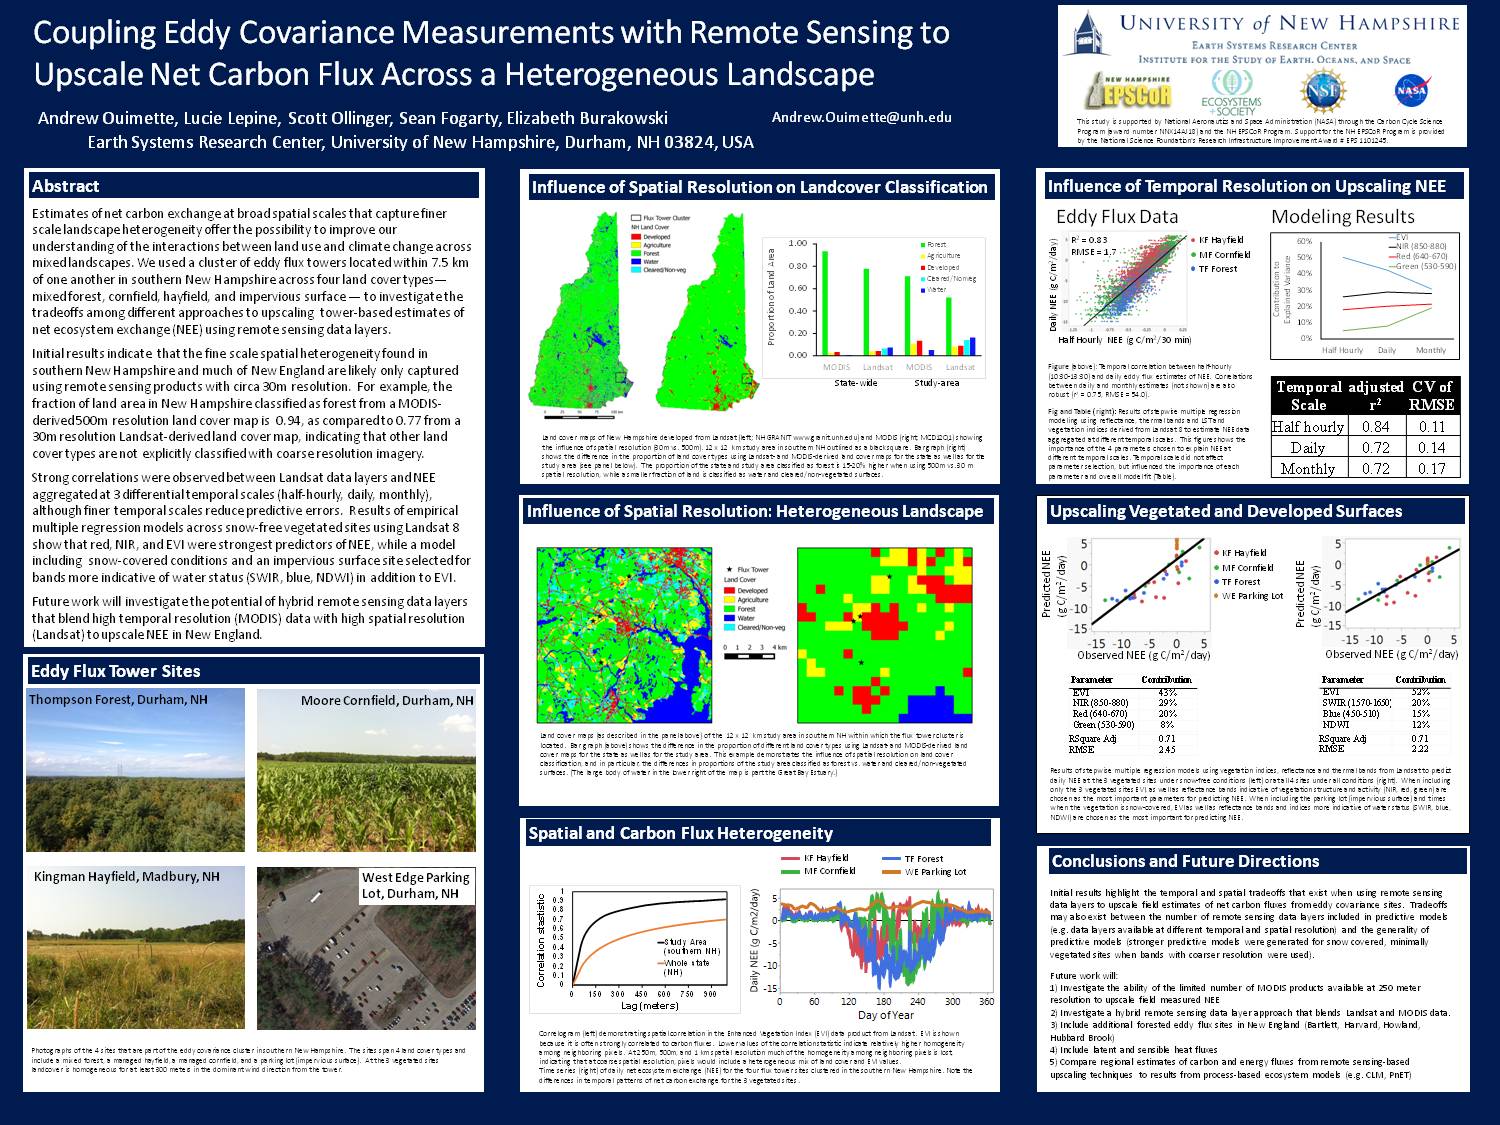 Coupling Eddy Covariance Measurements With Remote Sensing To Upscale Net Carbon Flux Across A Heterogeneous Landscape by lucie